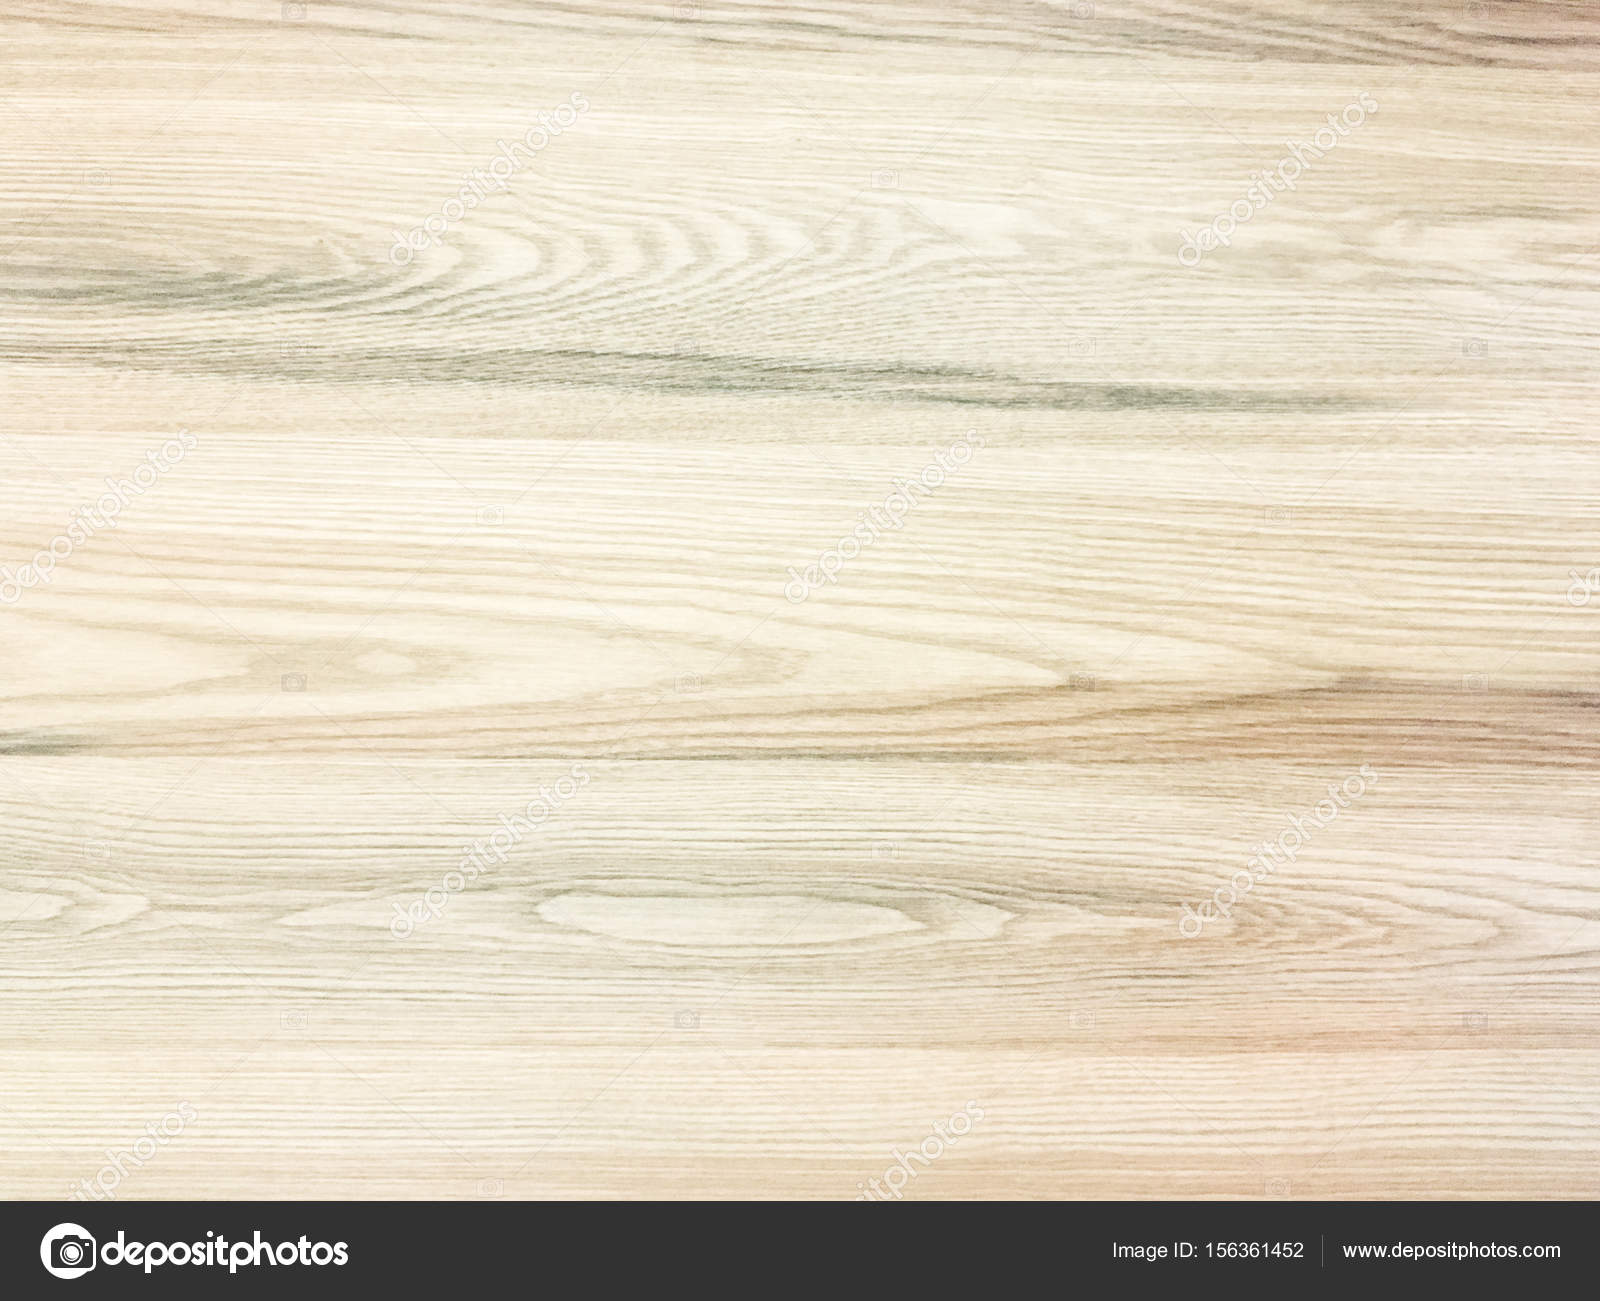 White Organic Wood Texture. Light Wooden Background. Old Washed Wood ...